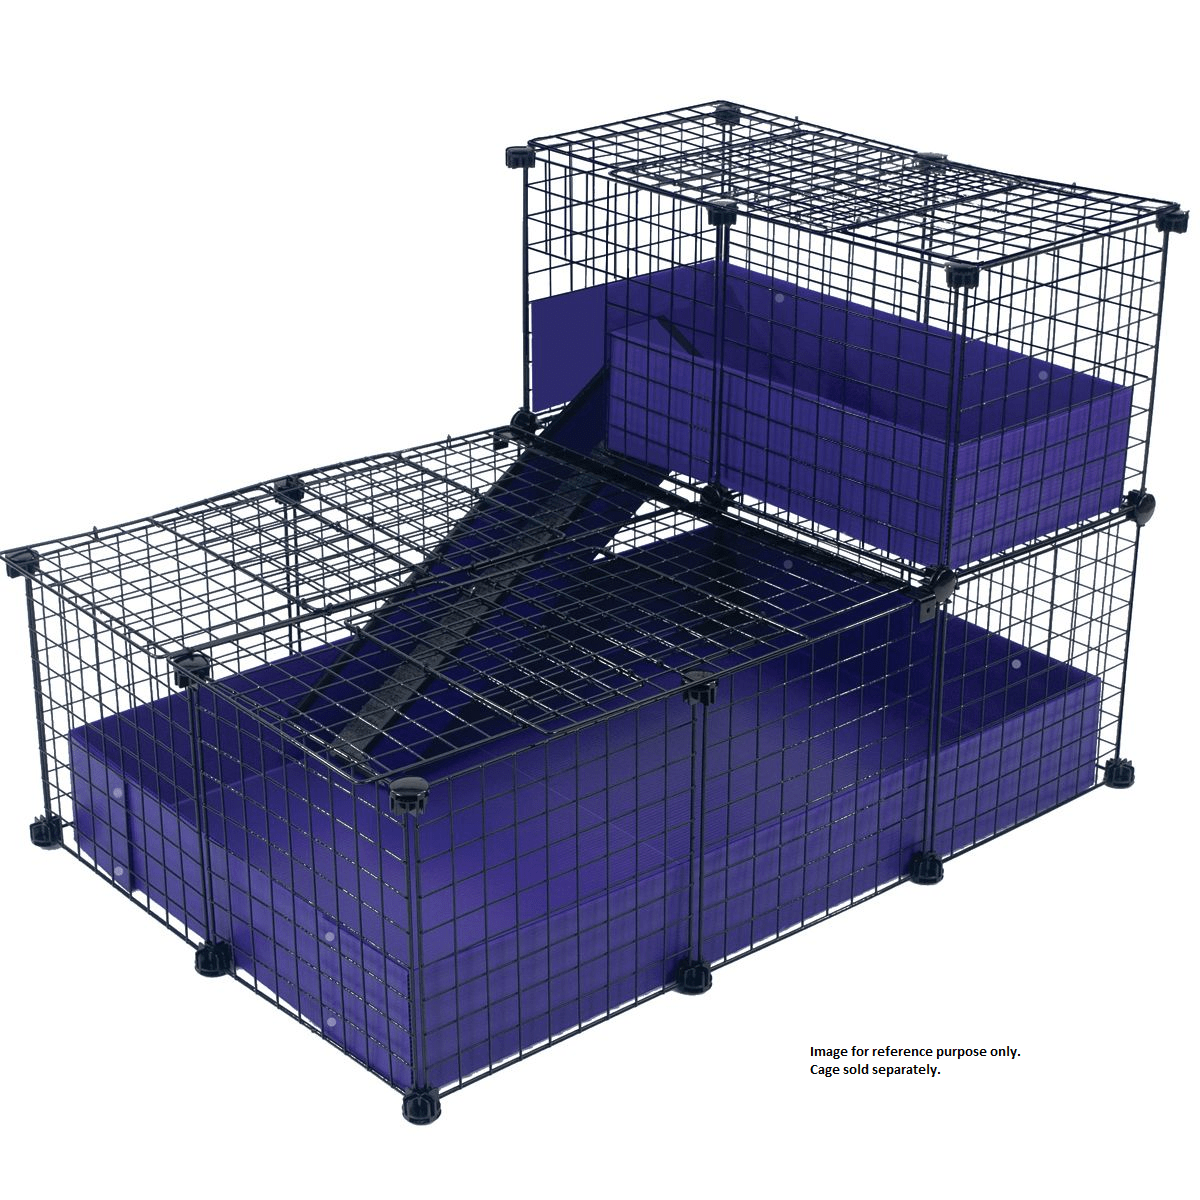 Covered small/narrow purple C&C guinea pig cage